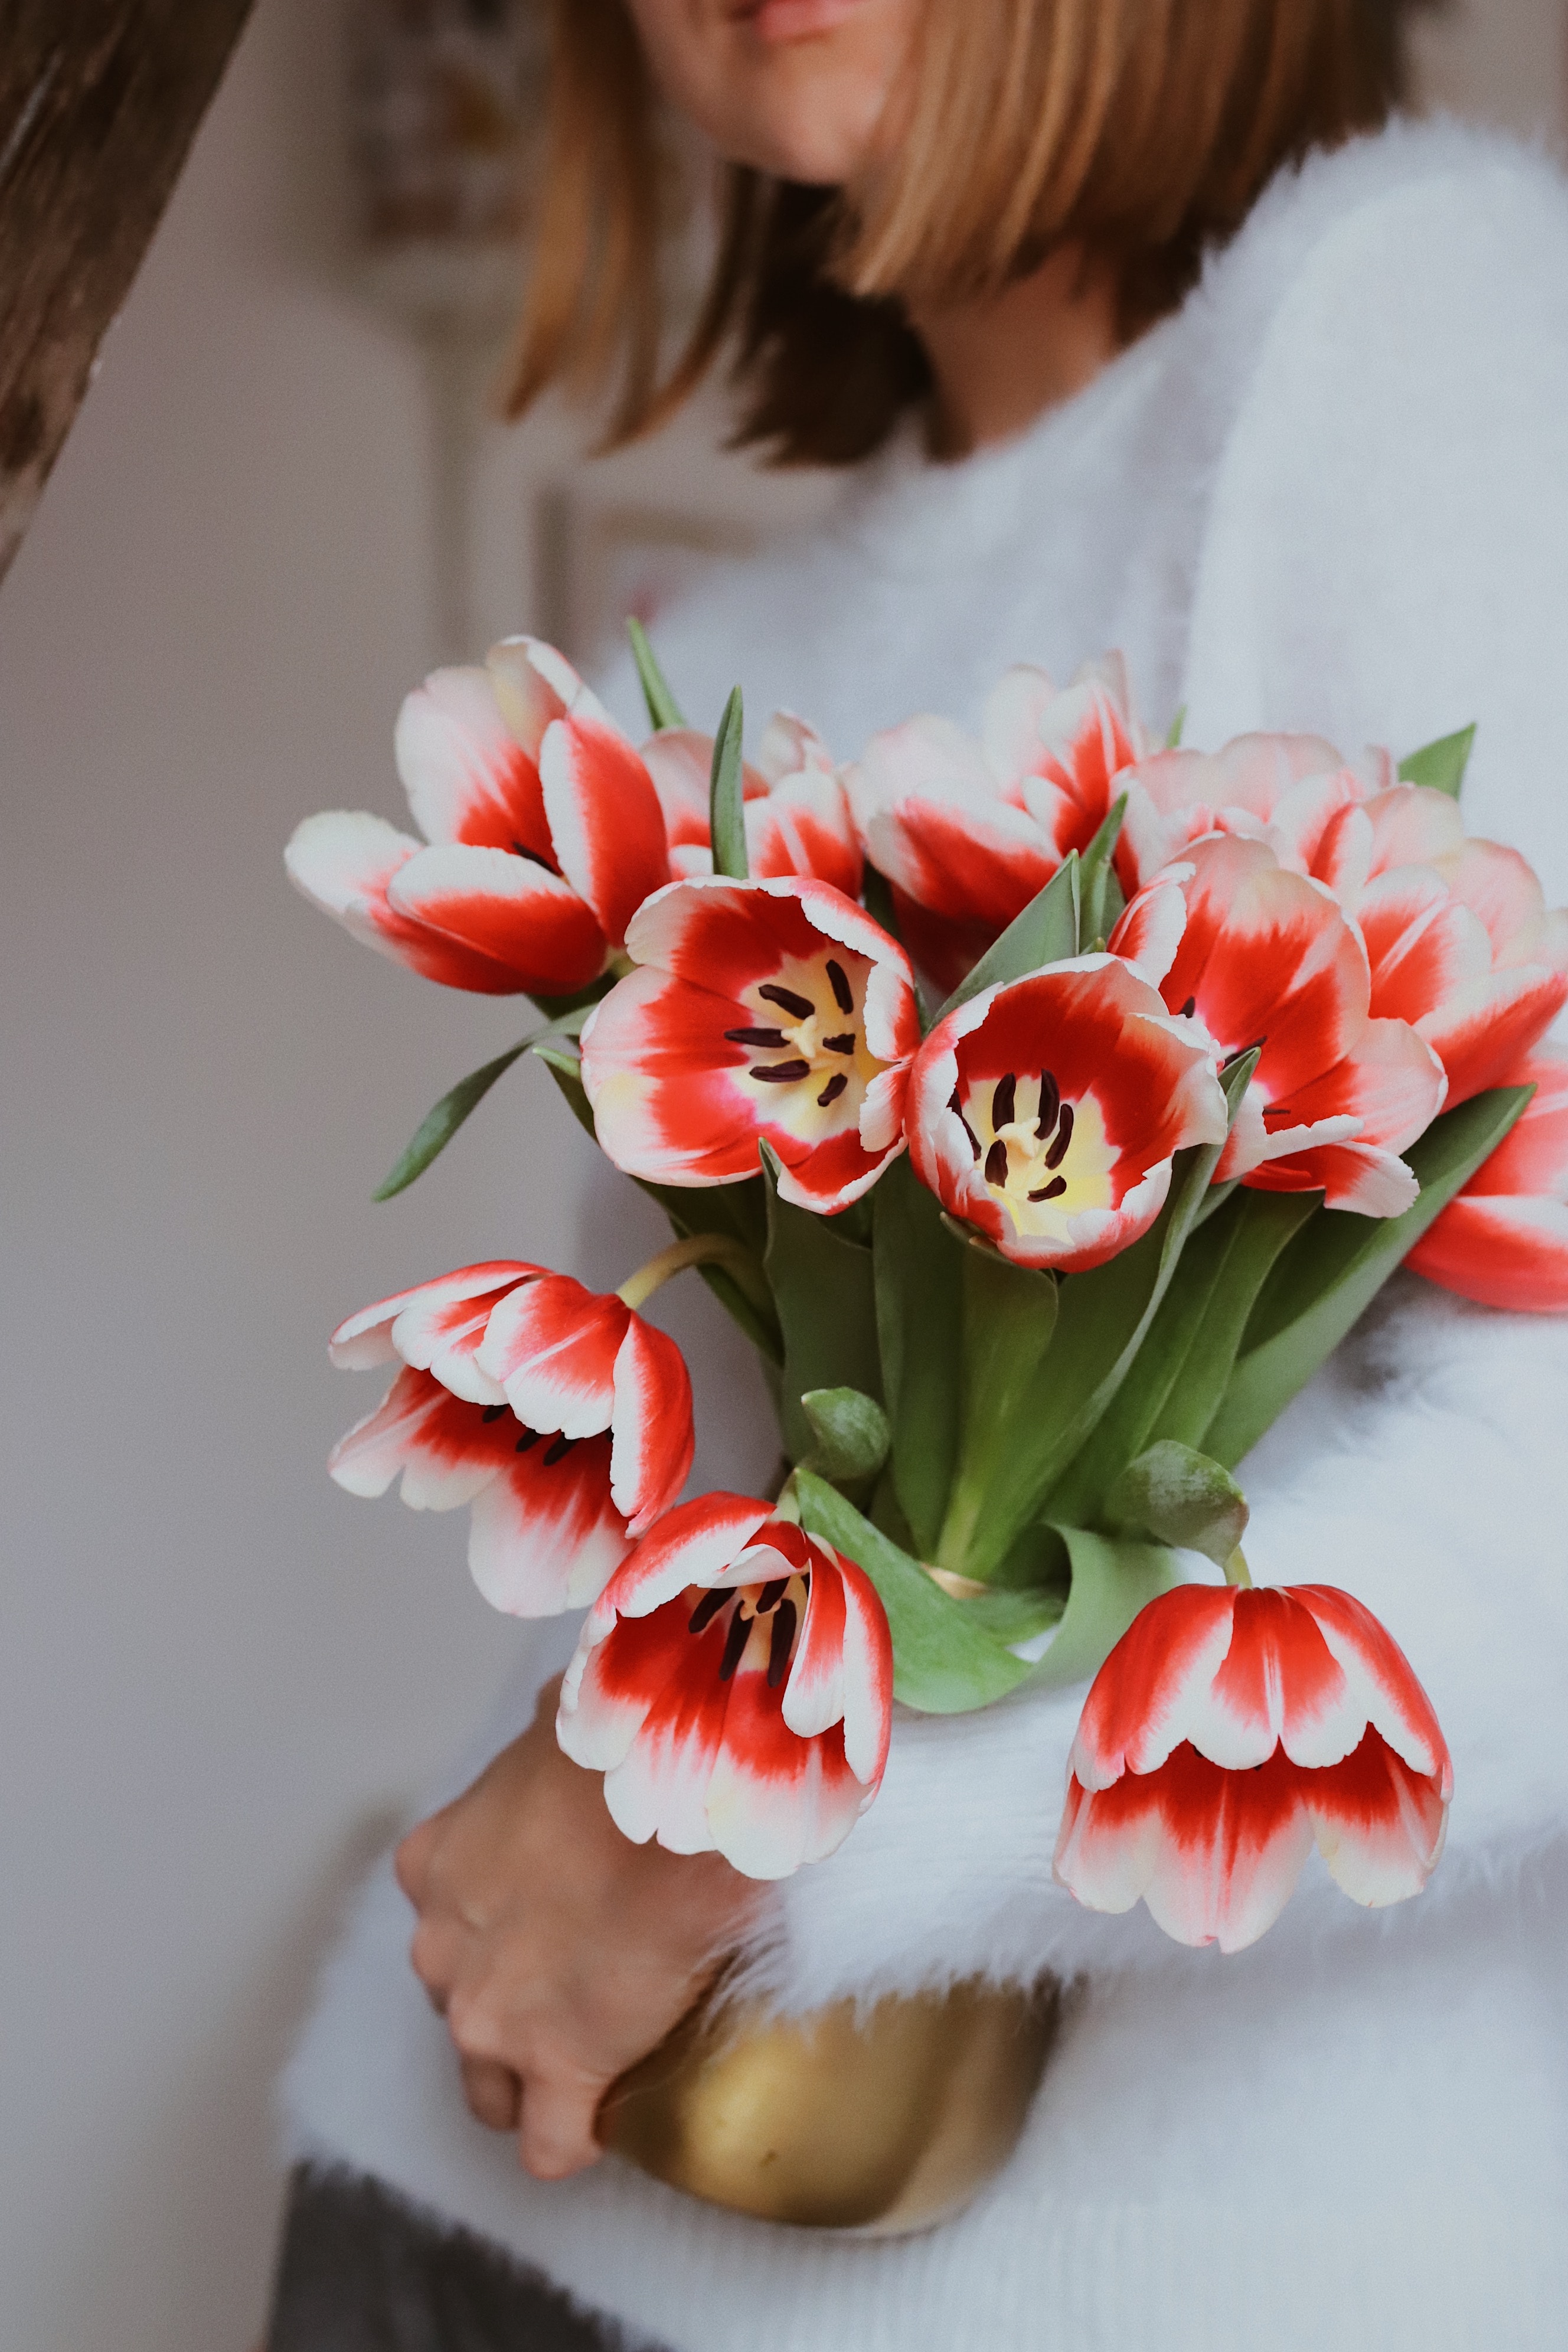 Download PC Wallpaper flowers, tulips, red, bouquet